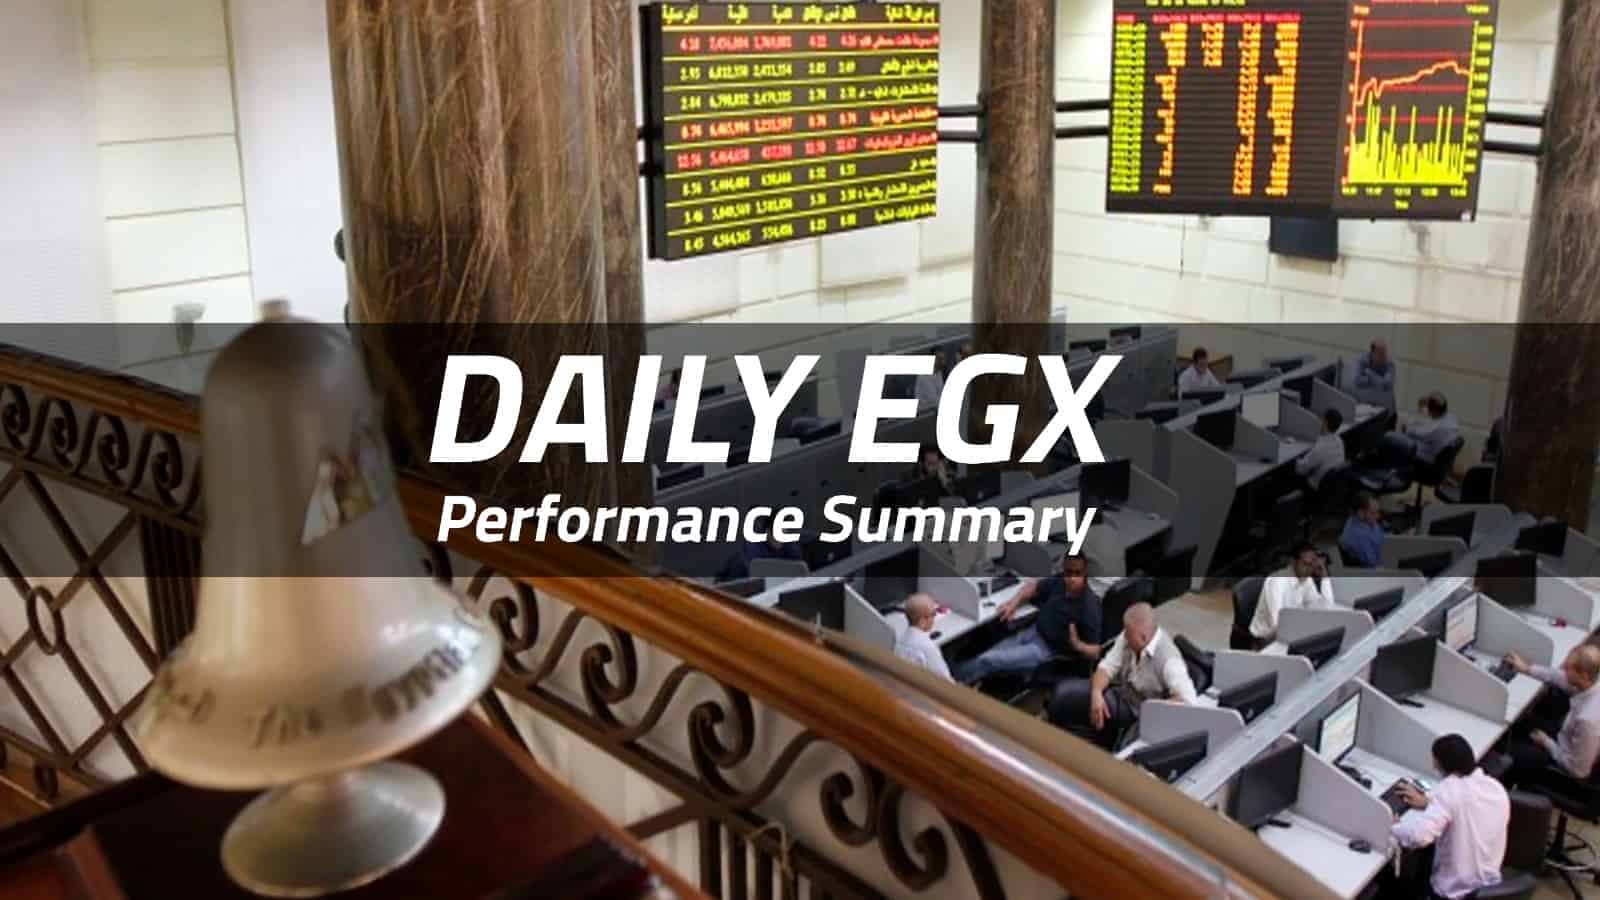 EGX notches 3rd consecutive session of losses

